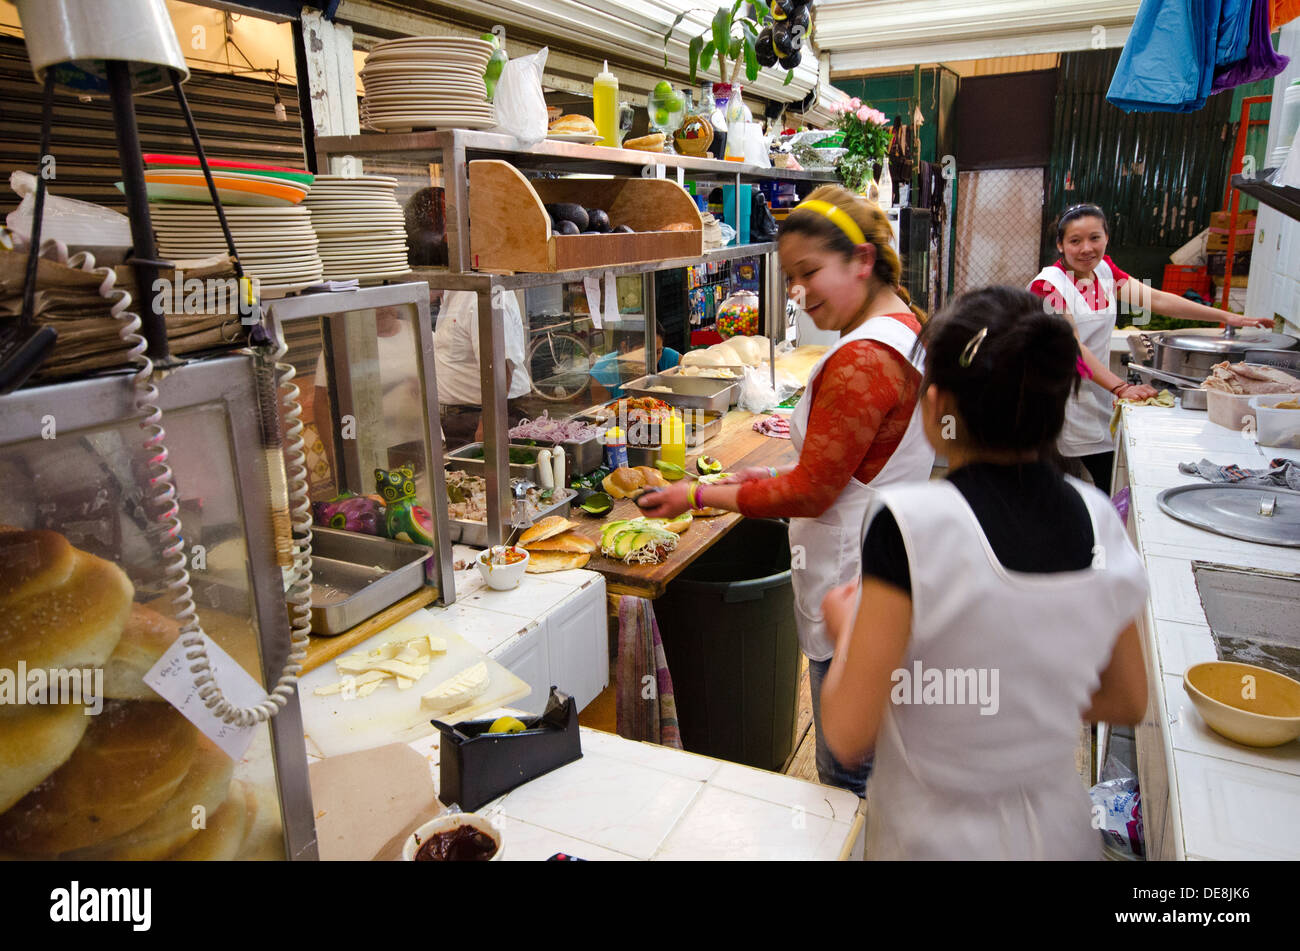 Women preparing food in the kitchen of a snack bar in the indoor market at Cholula in the state of Puebla in Mexico Stock Photo